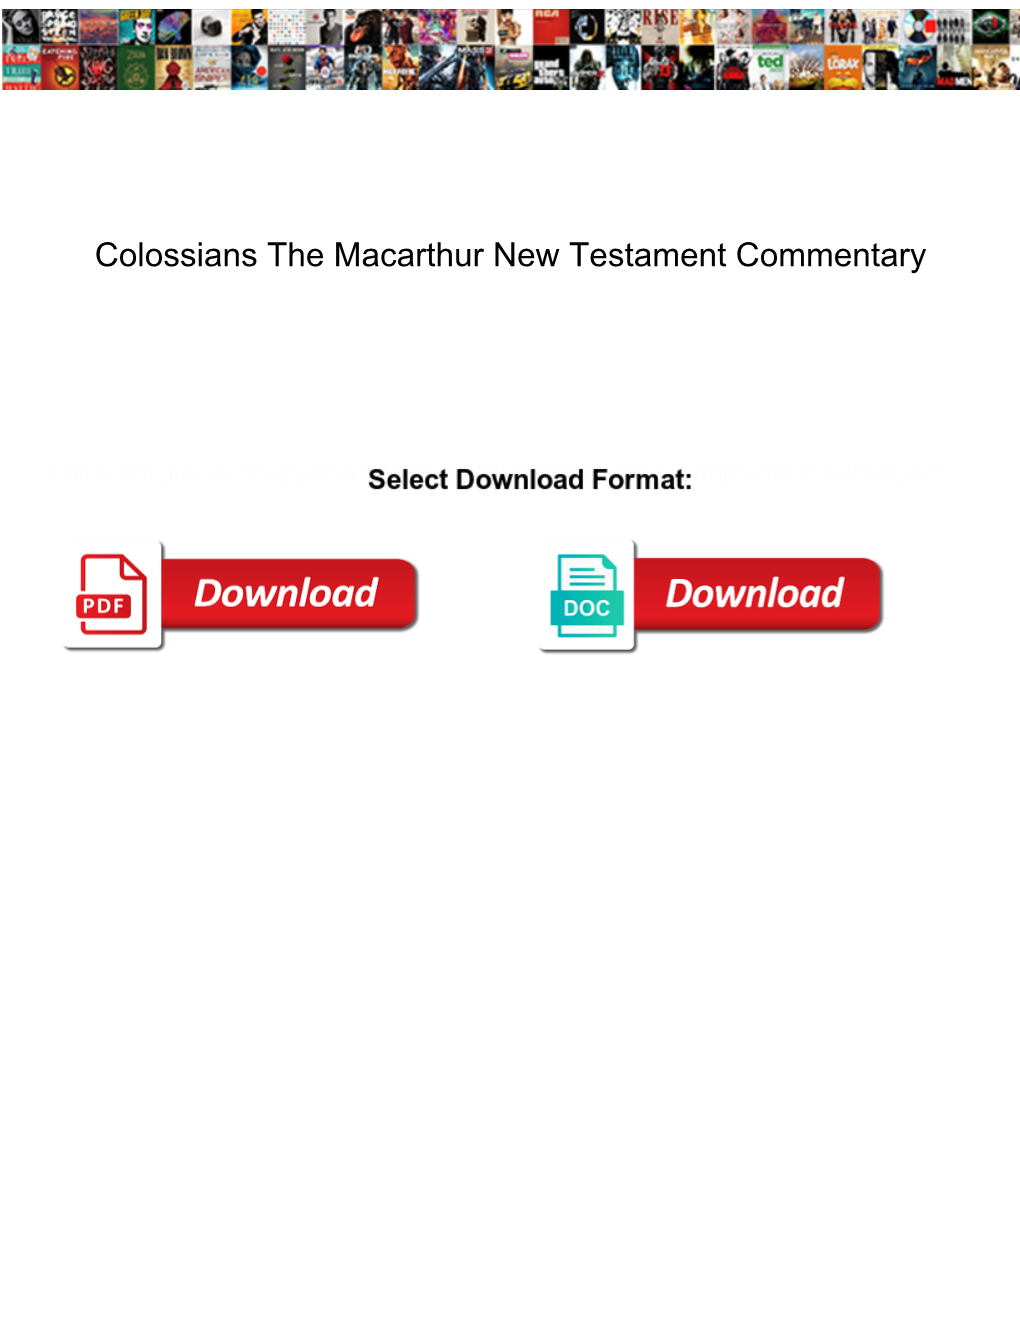 Colossians the Macarthur New Testament Commentary